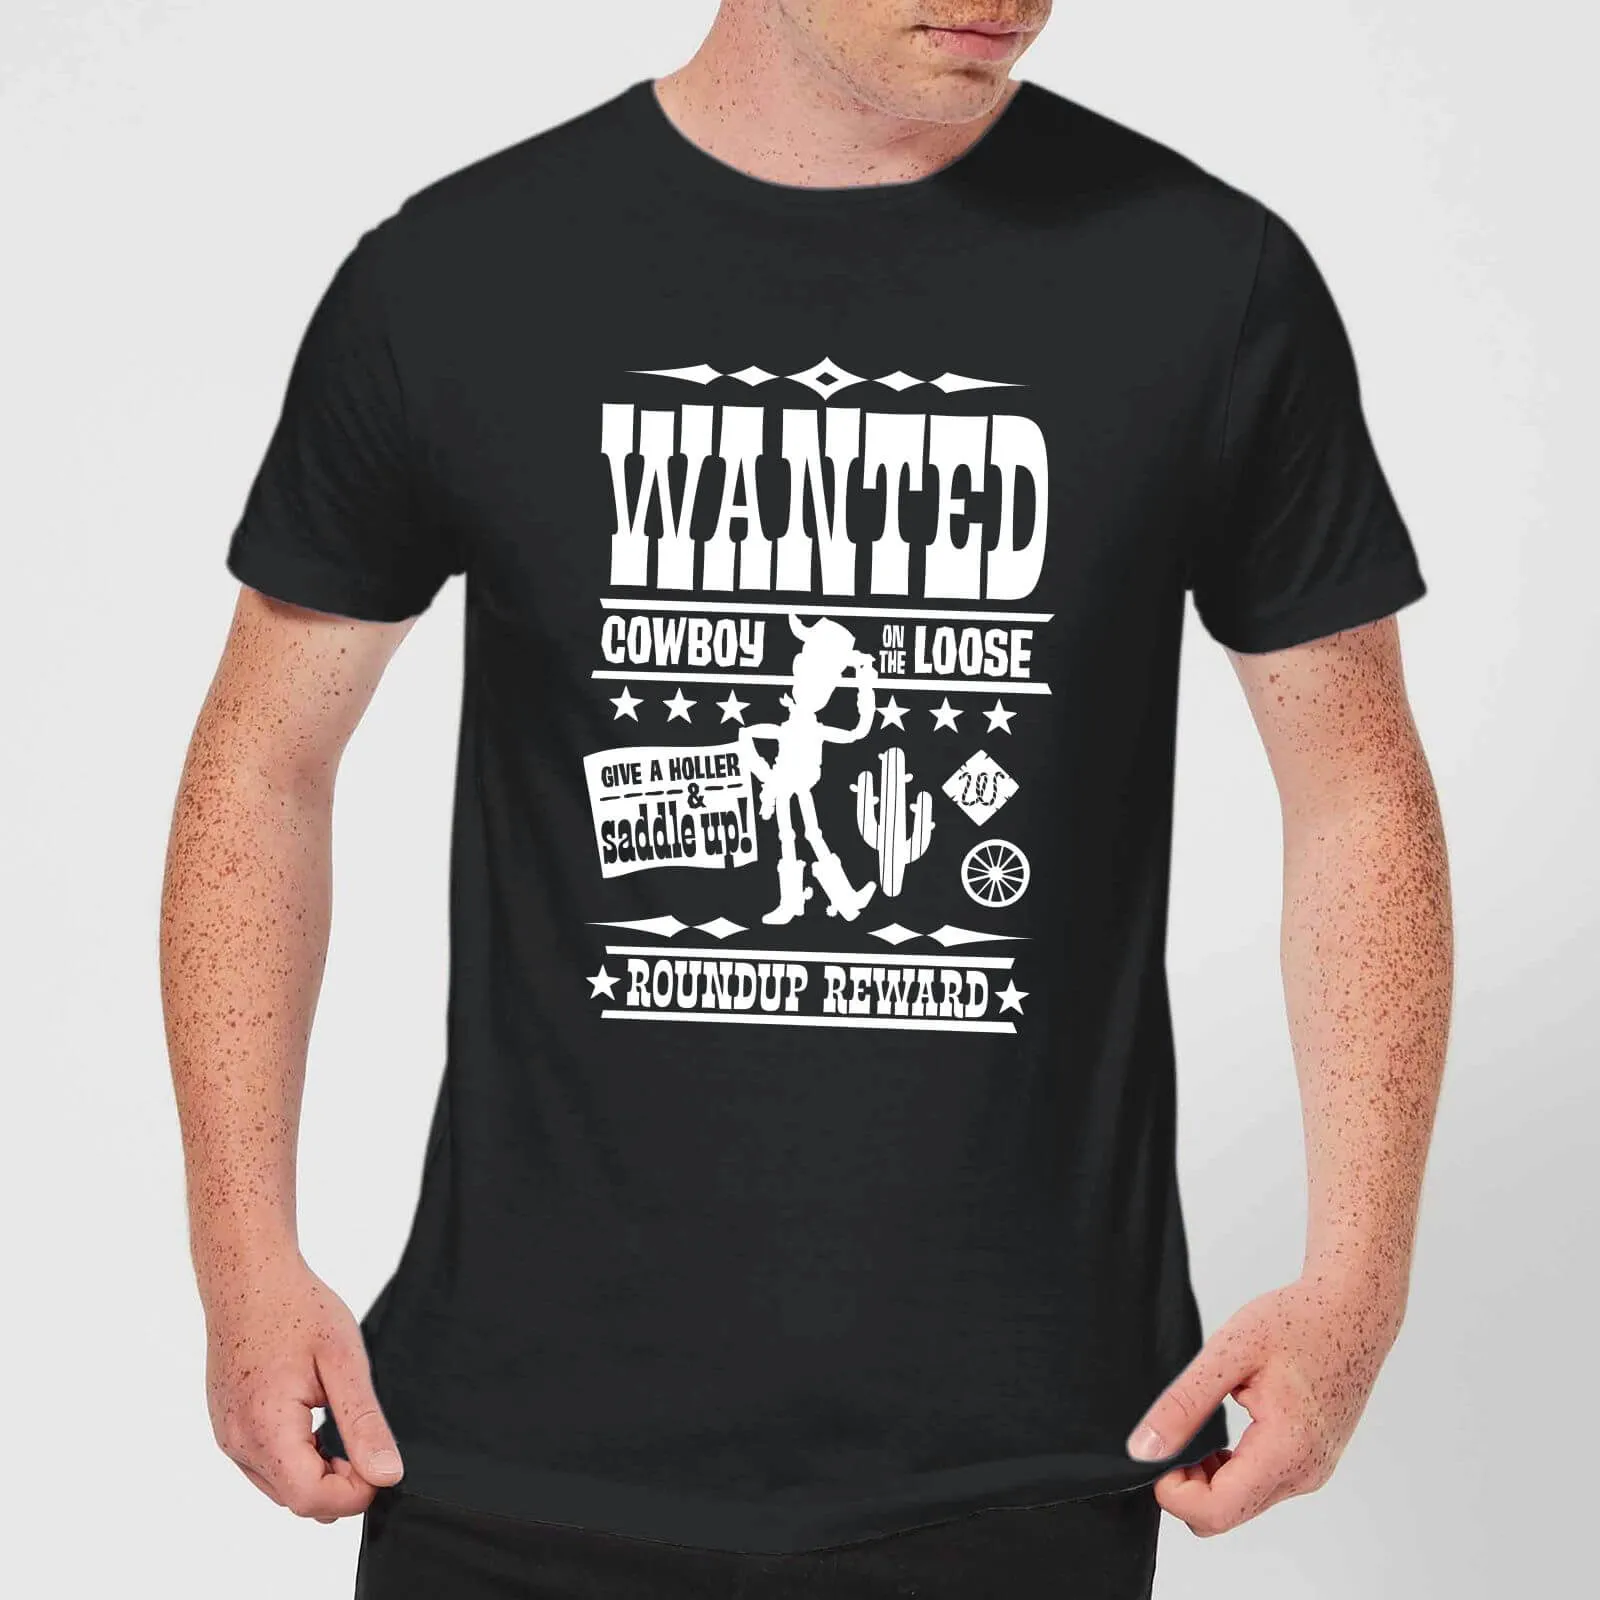 Toy Story Wanted Poster Men's T-Shirt - Black - XL - Nero